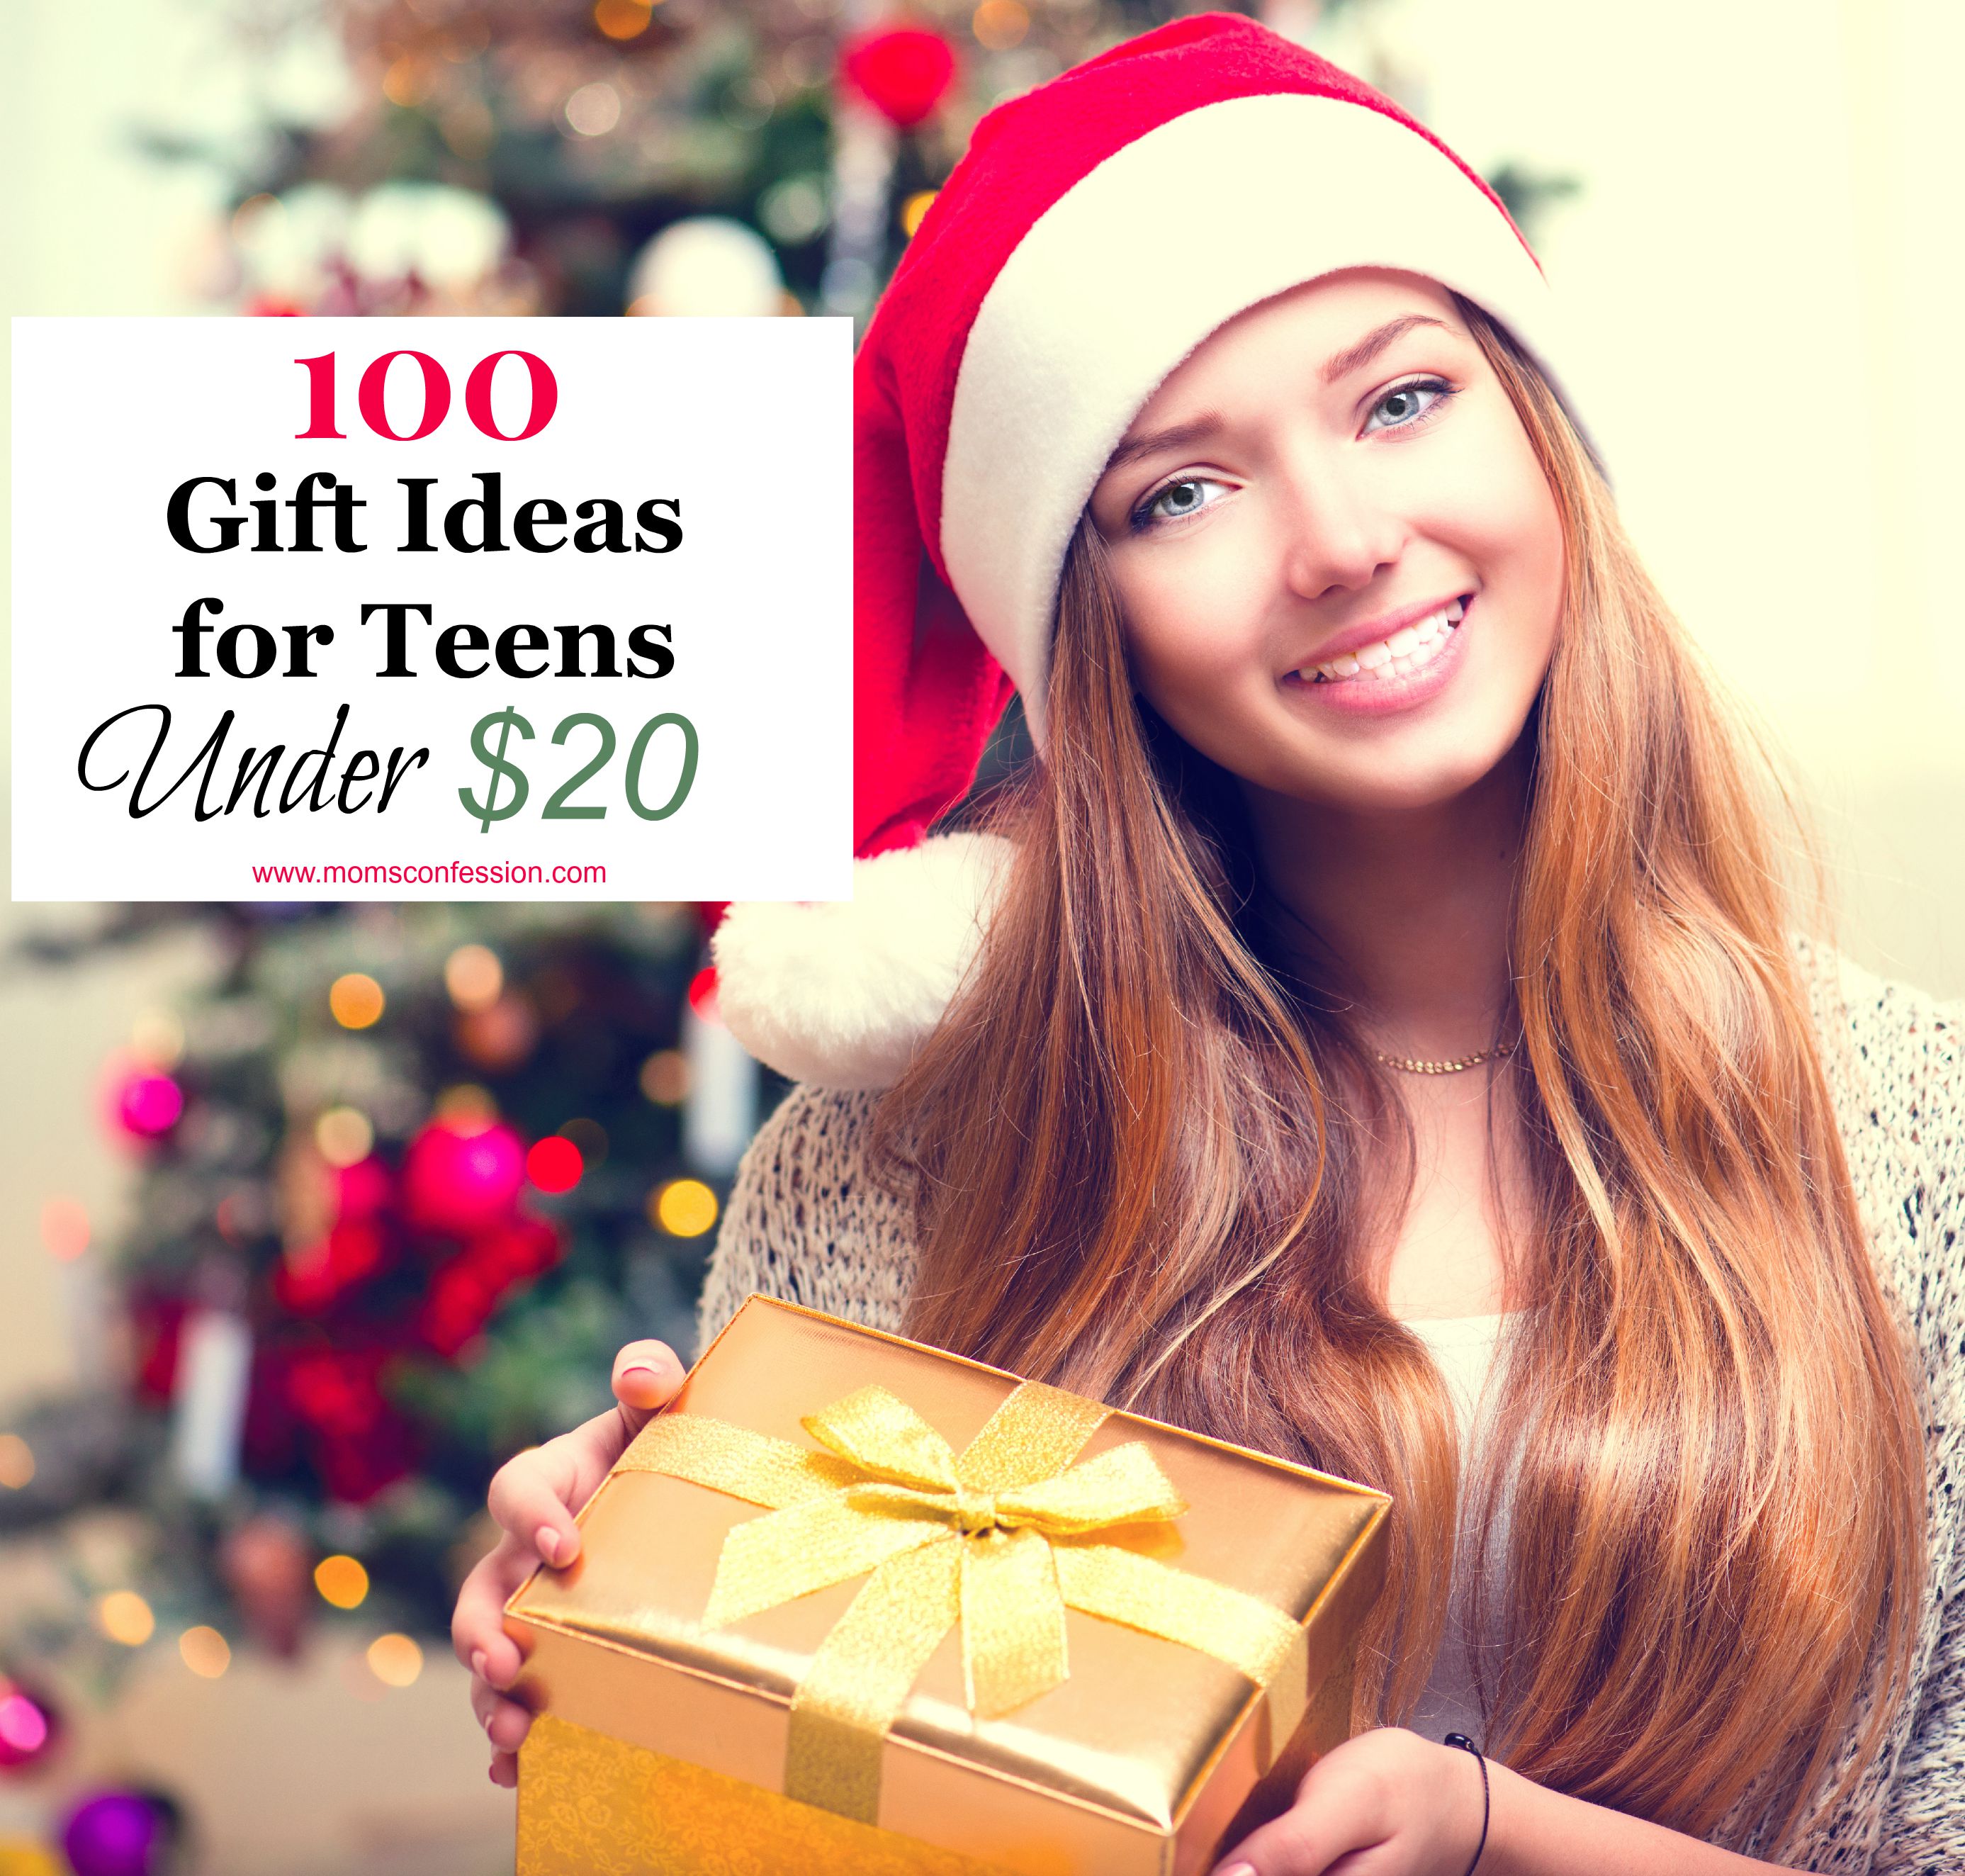 https://www.momsconfession.com/wp-content/uploads/2015/09/gift-ideas-for-teens.jpg